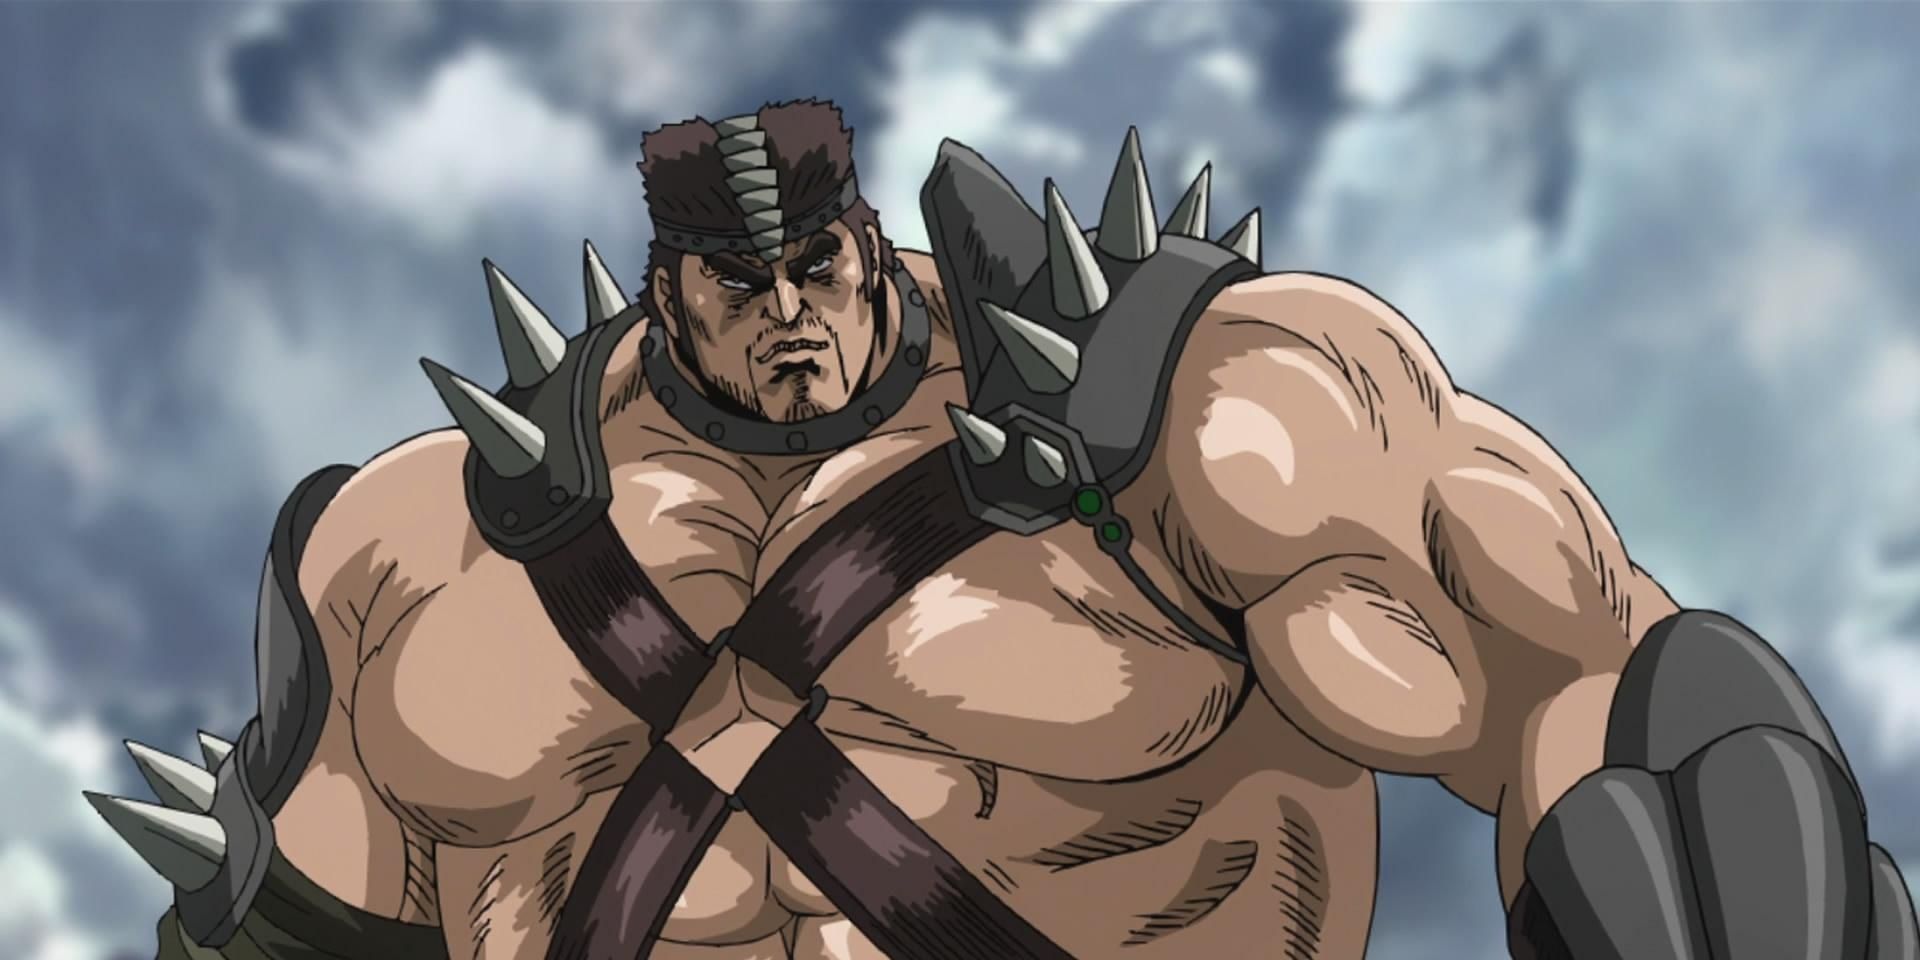 Fudoh from Fist of the North Star